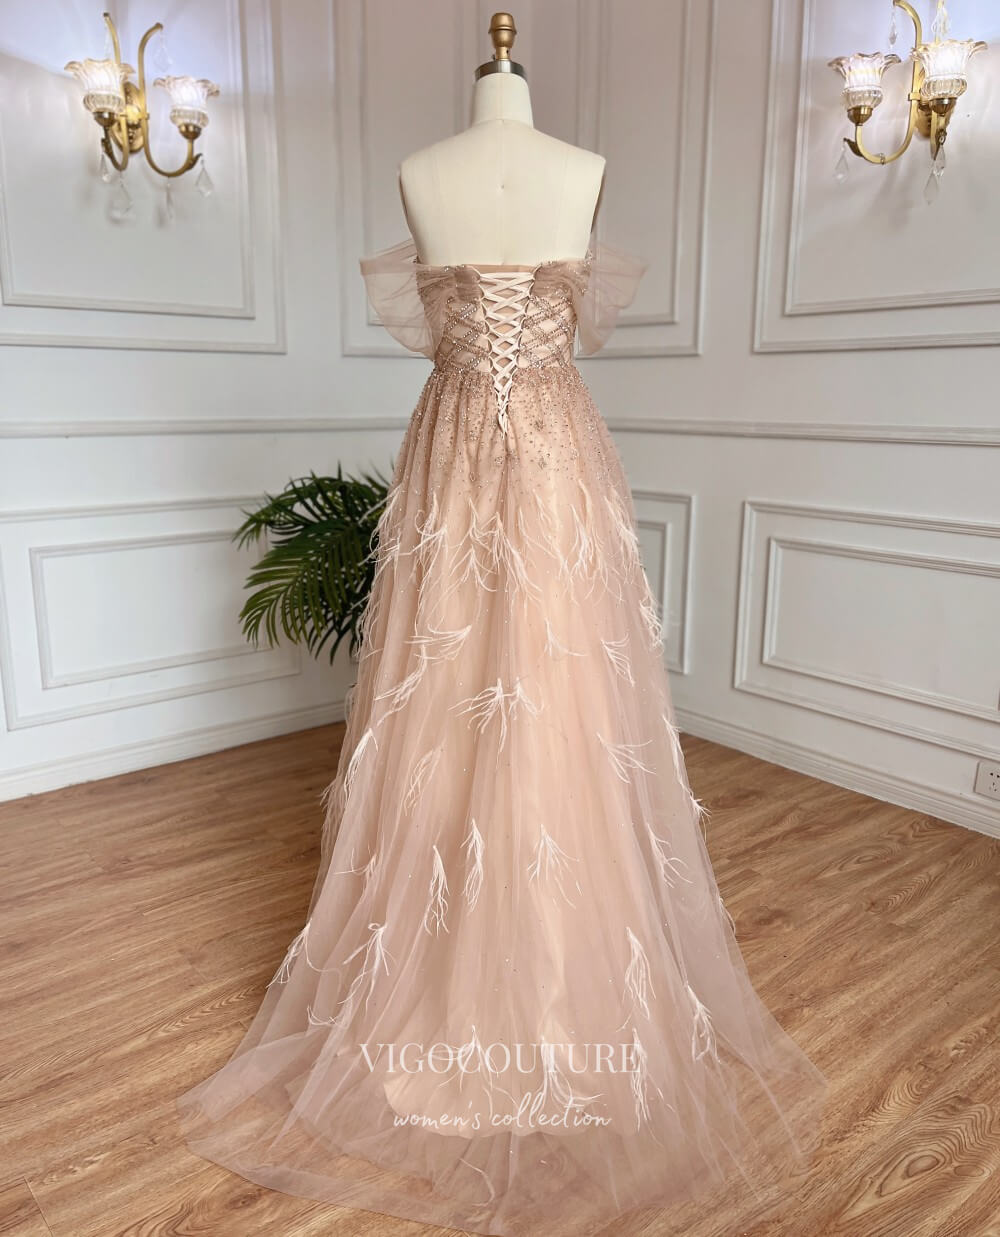 Beaded Feather Prom Dresses Off the Shoulder Evening Dress 22101-Prom Dresses-vigocouture-Pink-US2-vigocouture